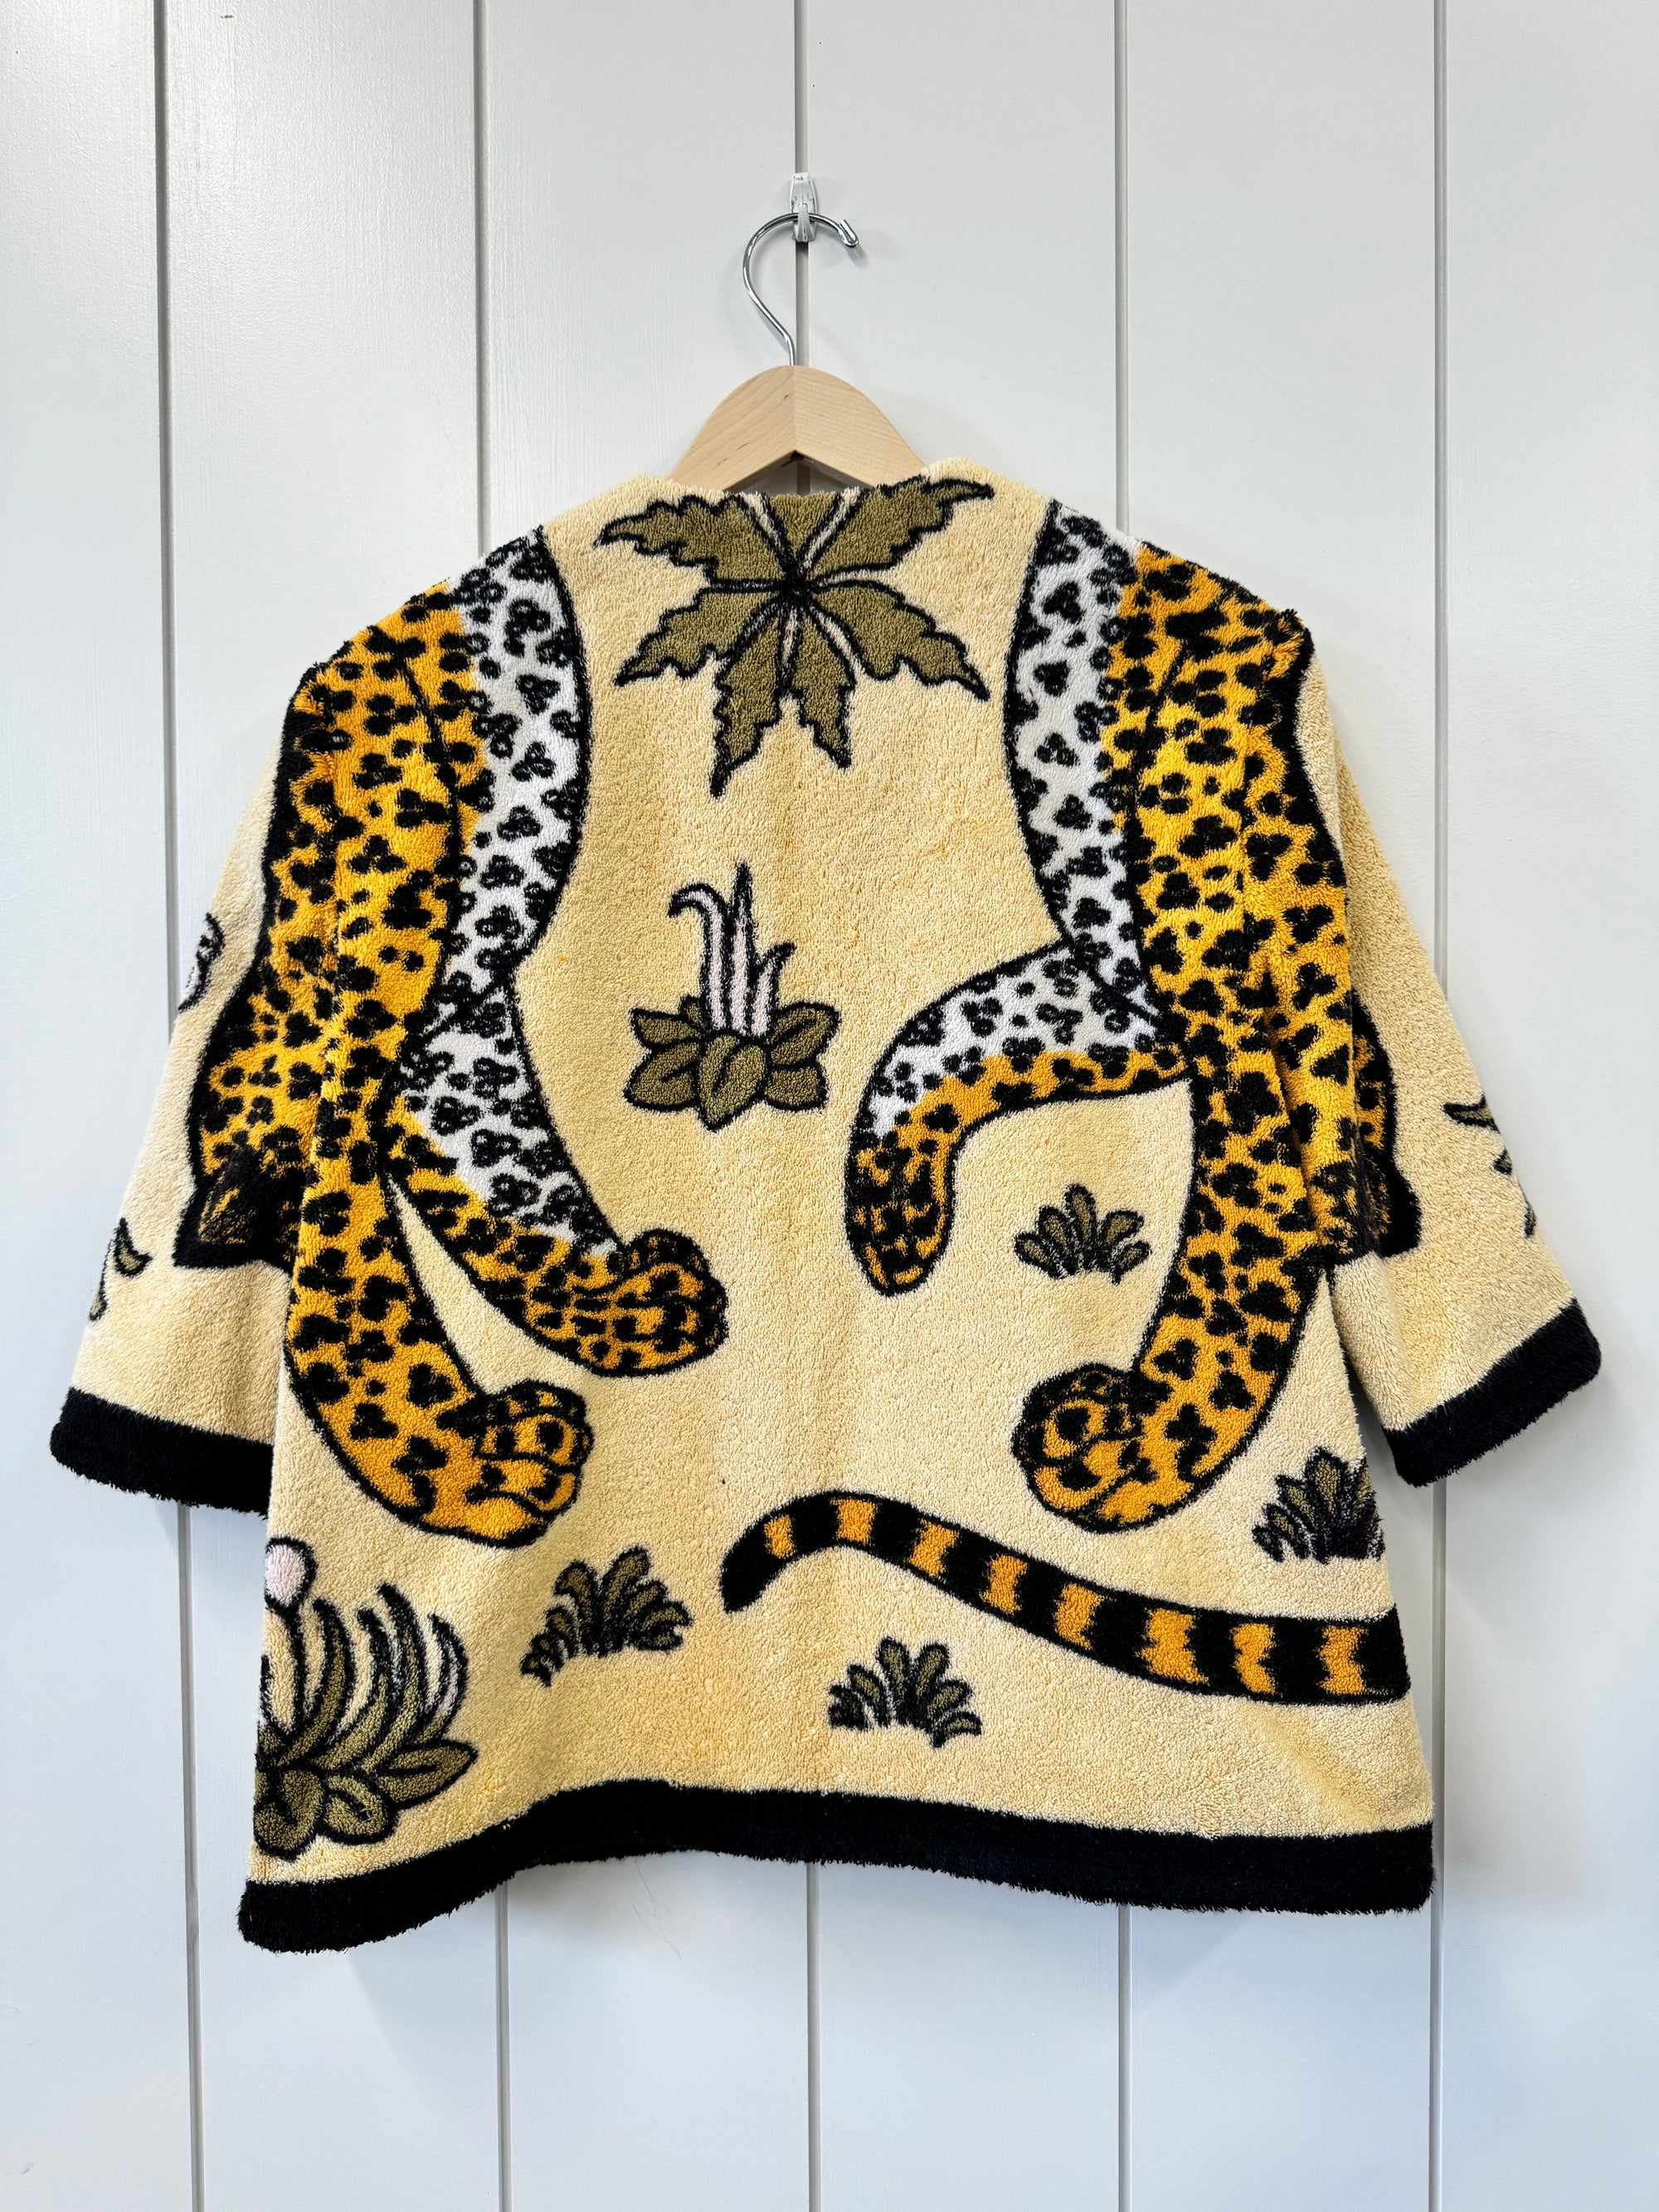 The Yellow Leopard Jacket